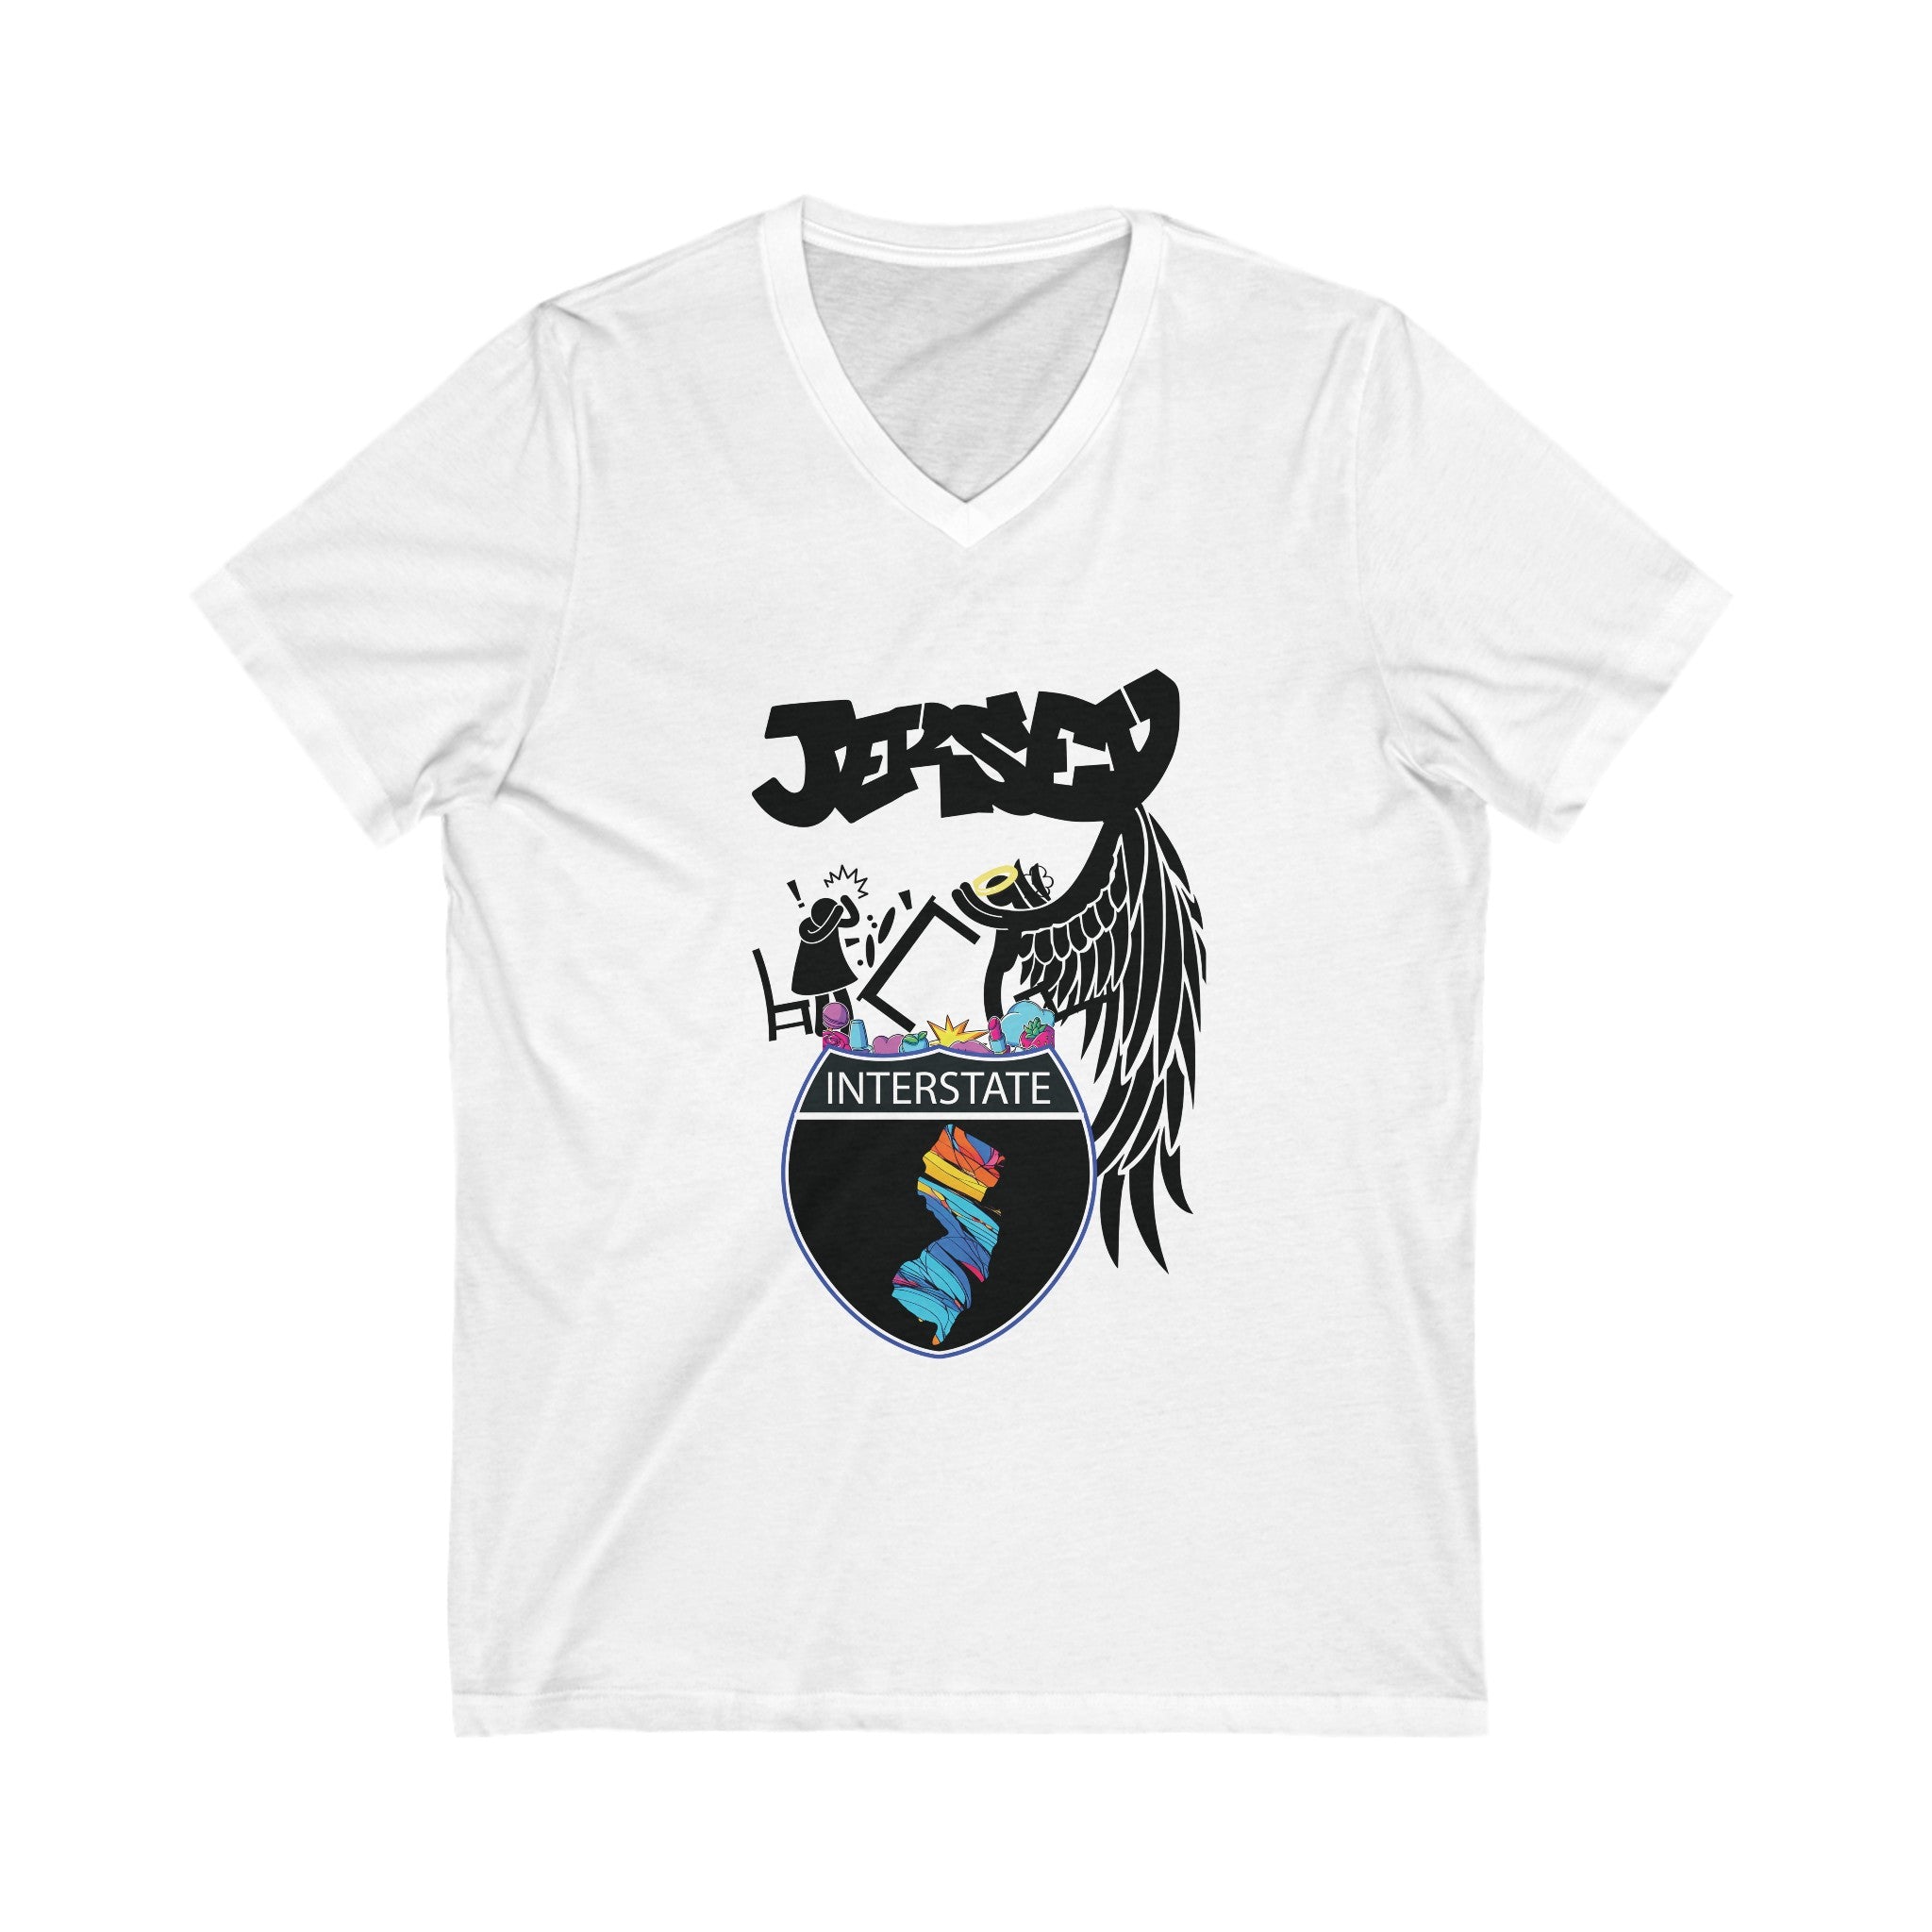 FURDreams “Jersey Style!” V-Neck Tee Shirt